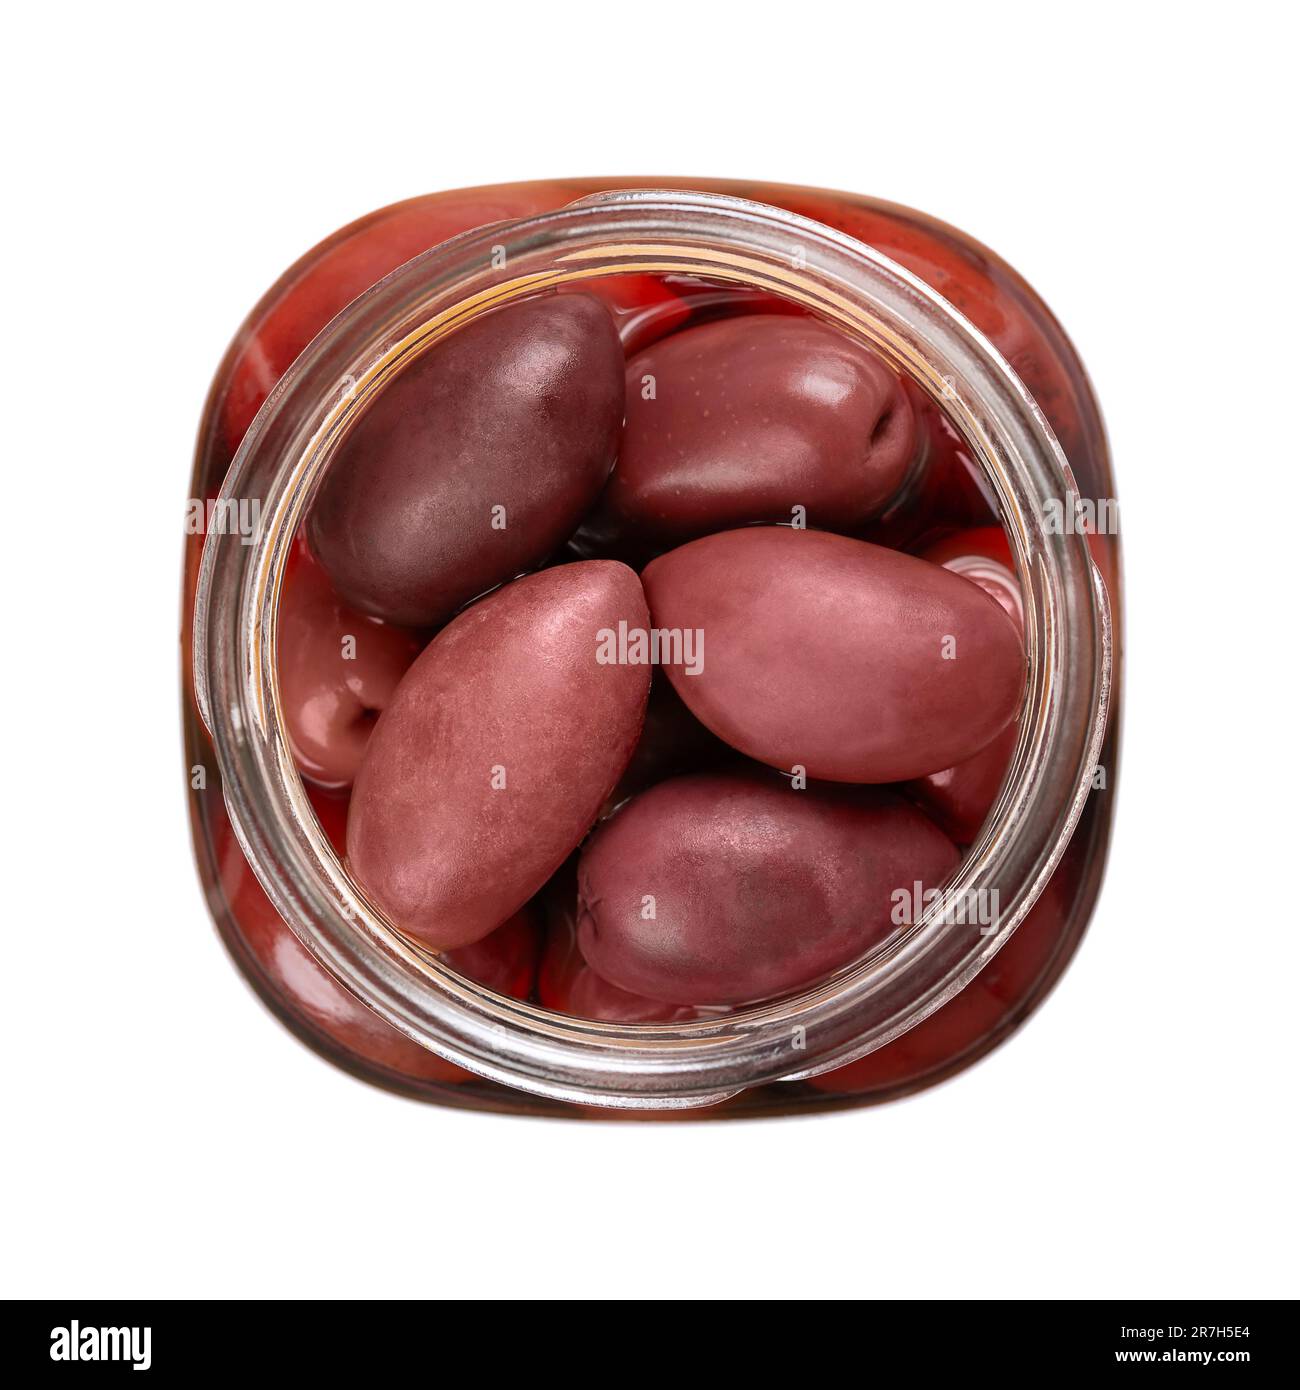 Kalamata olives in an open jar, from above. Whole, large and dark purple table olives from the Kalamata region in Greece. Stock Photo